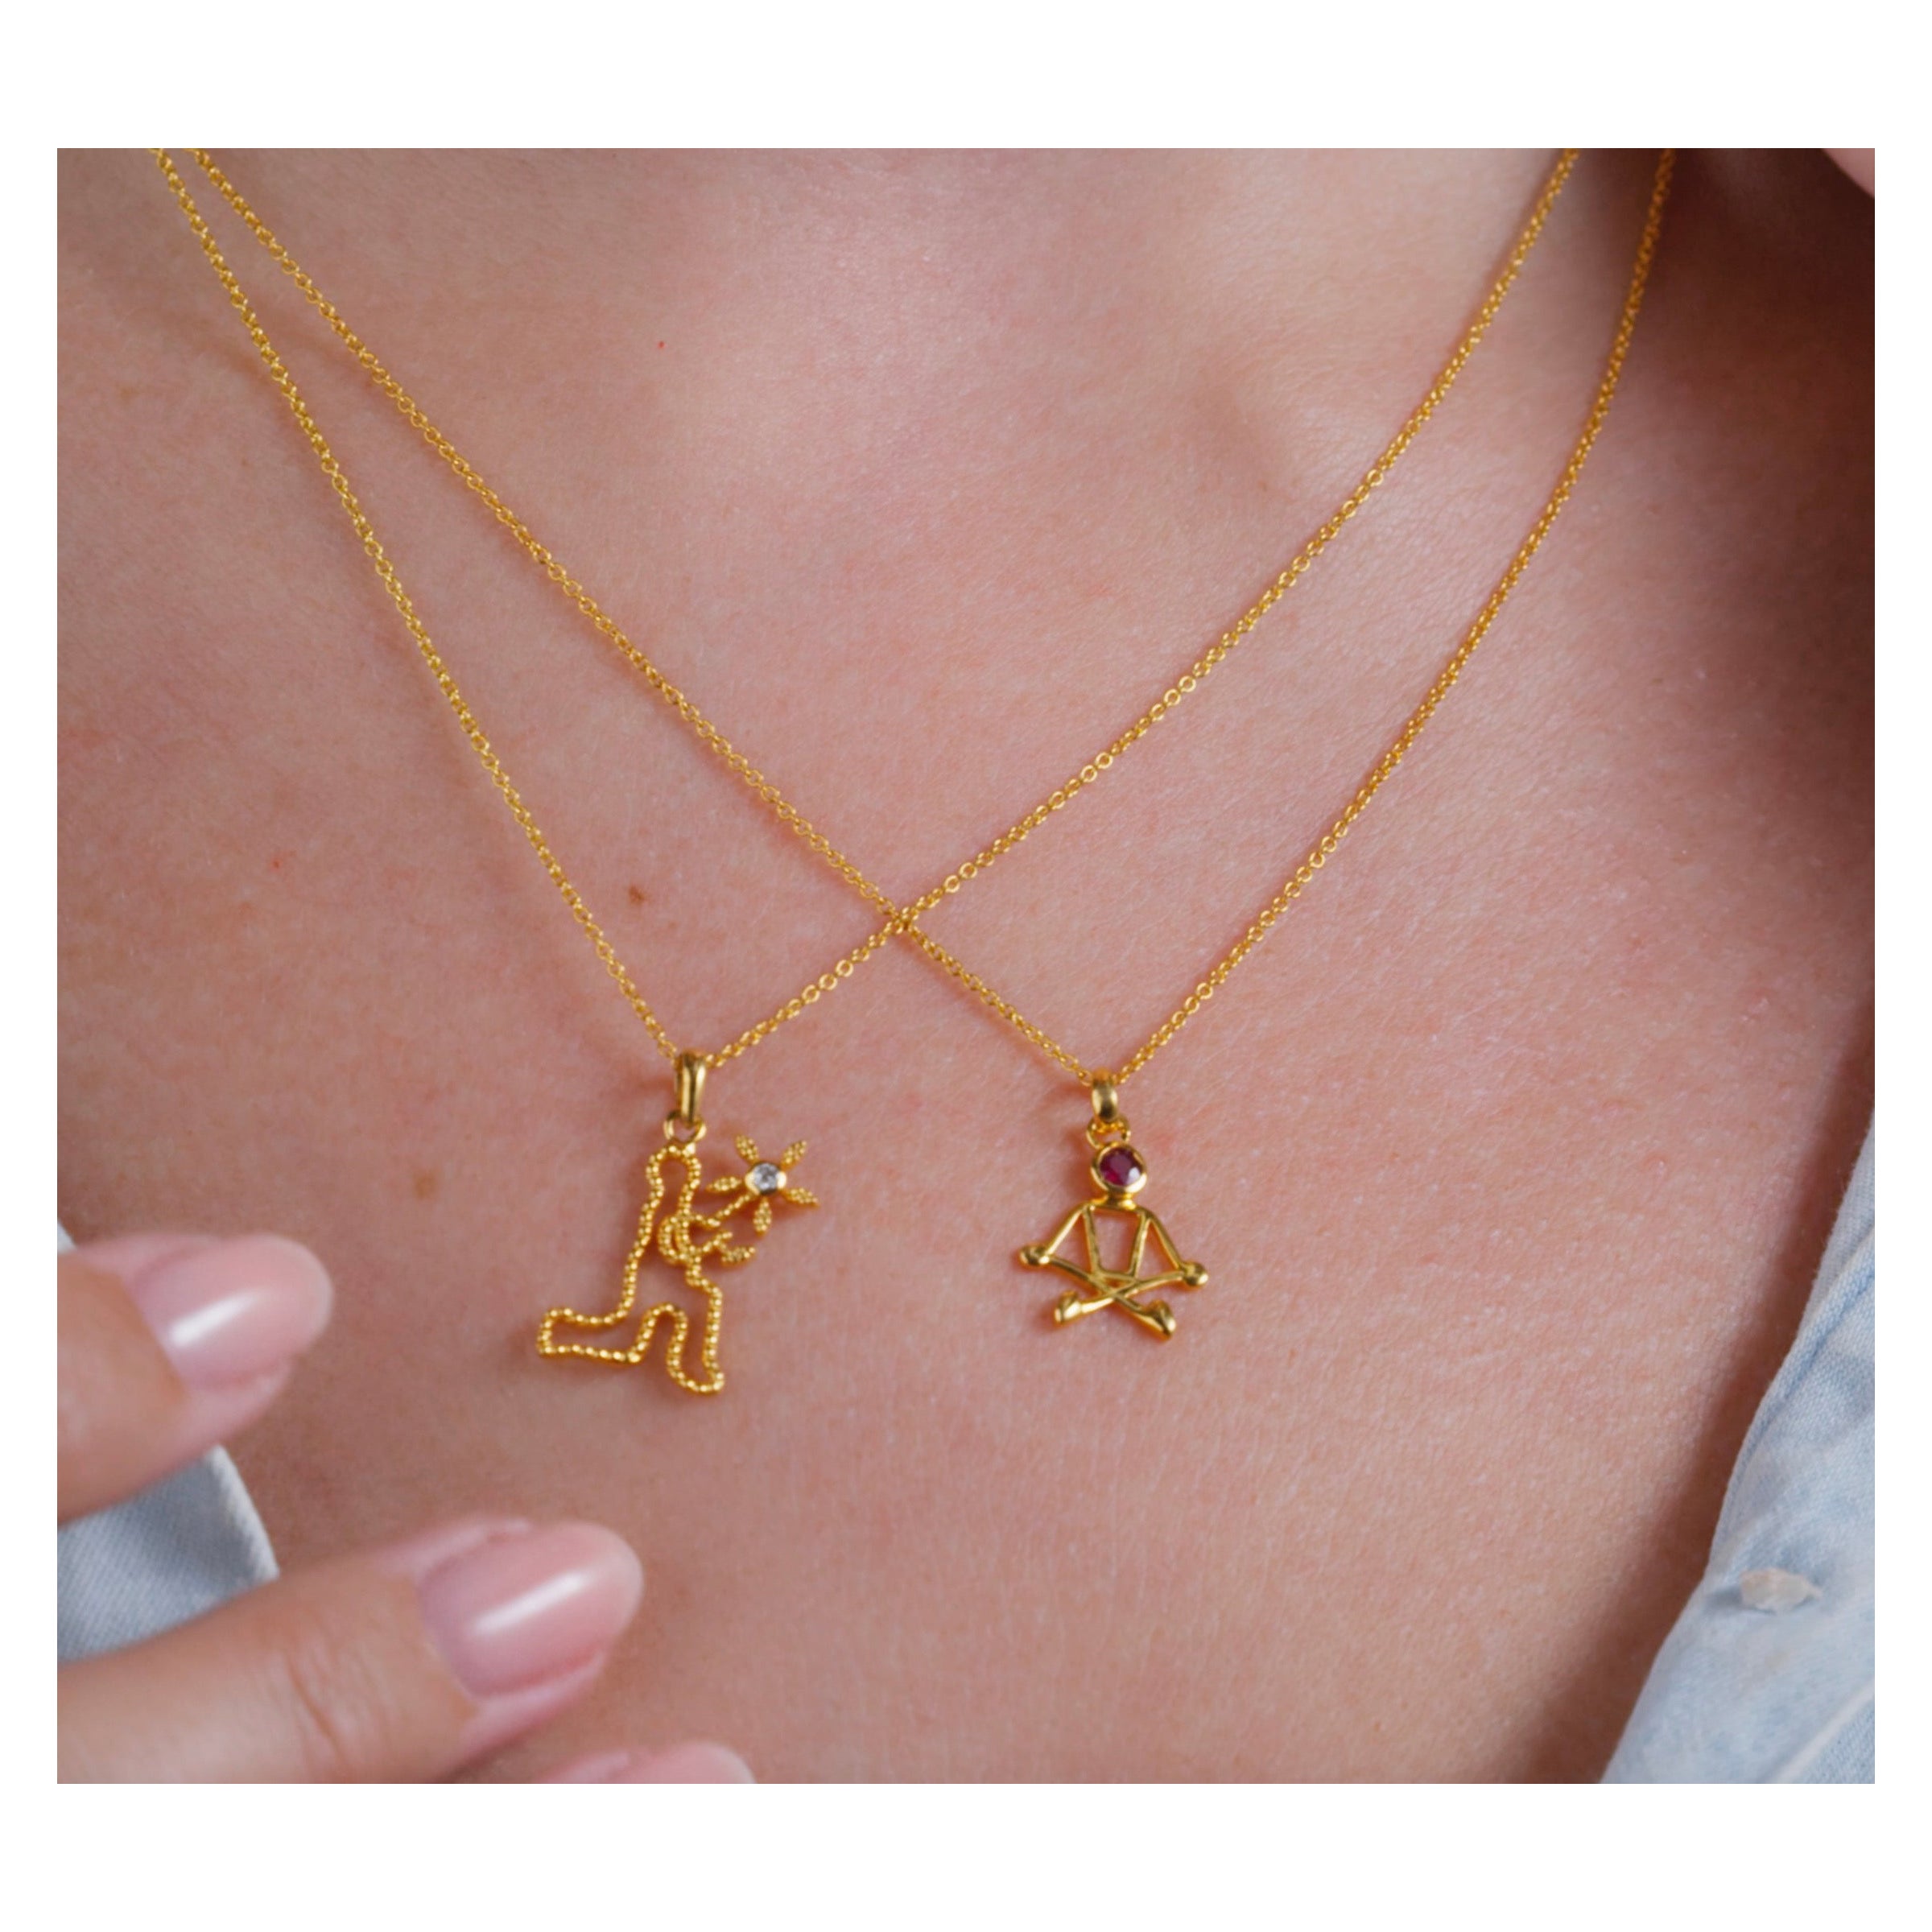 0.02 Carat Diamond Yellow Gold Stick Figure with Flower Pendant Necklace For Sale